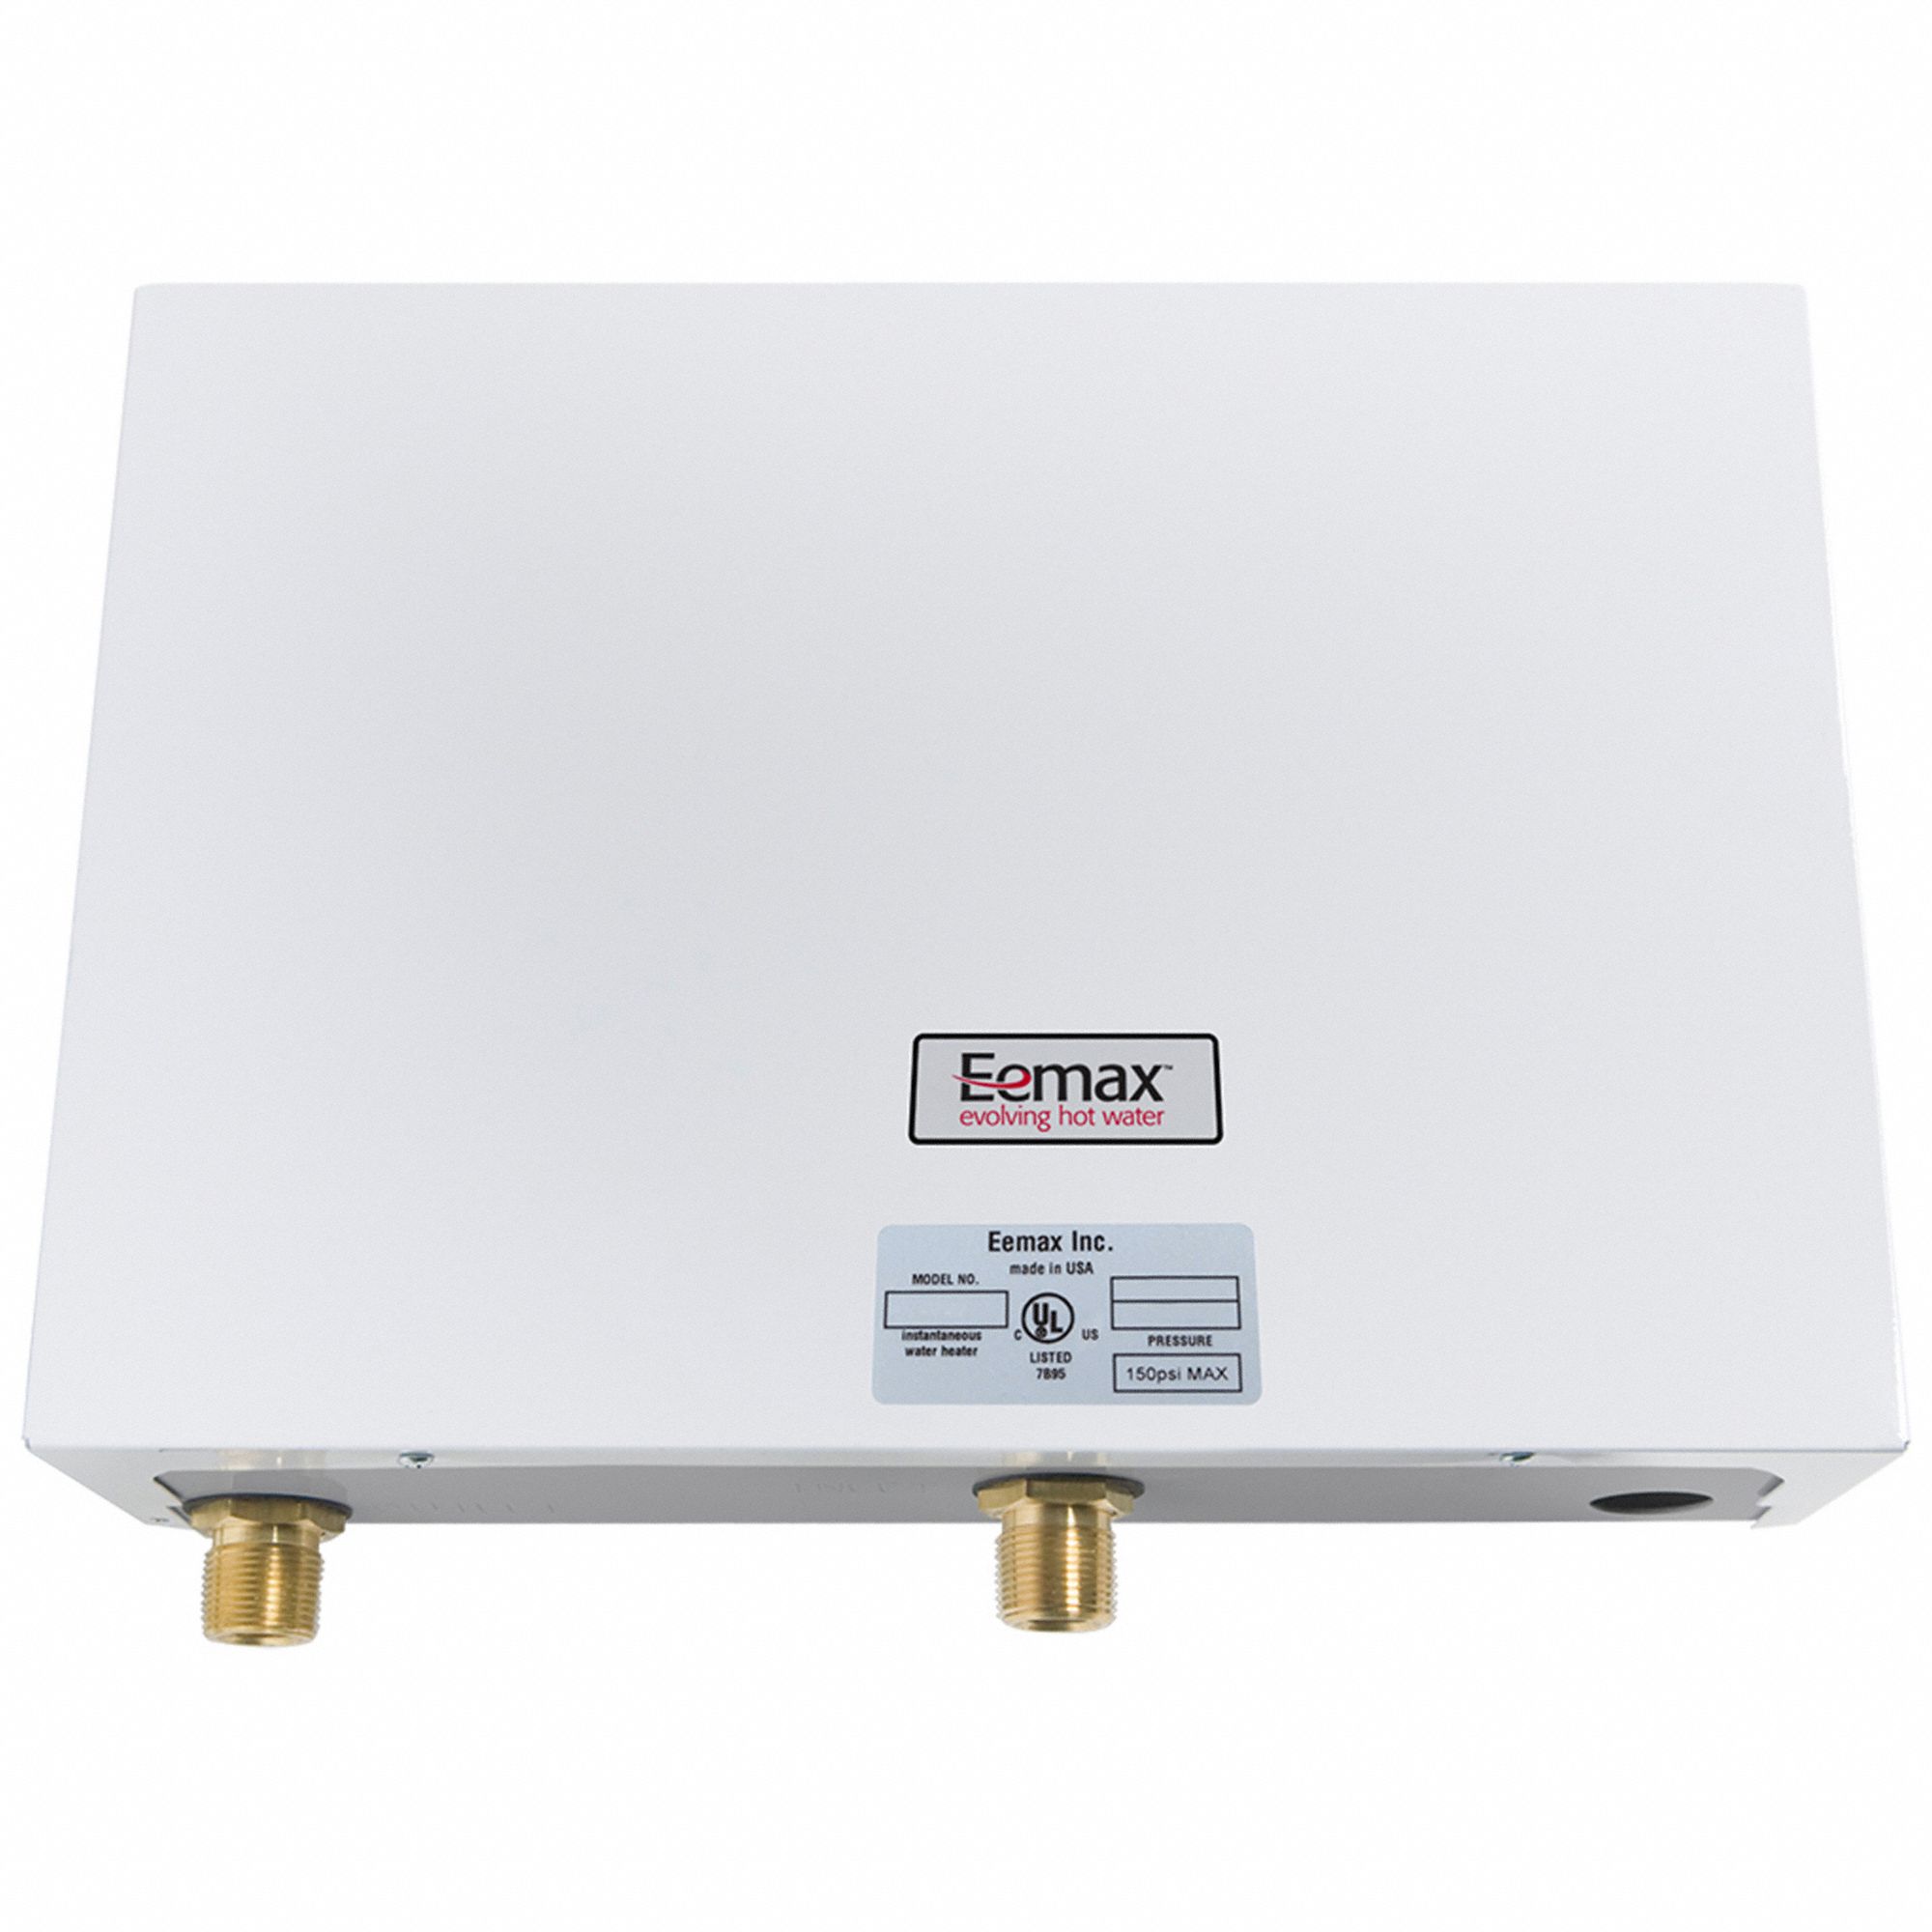 EEMAX EX180T3 Electric Tankless Water Heater208V